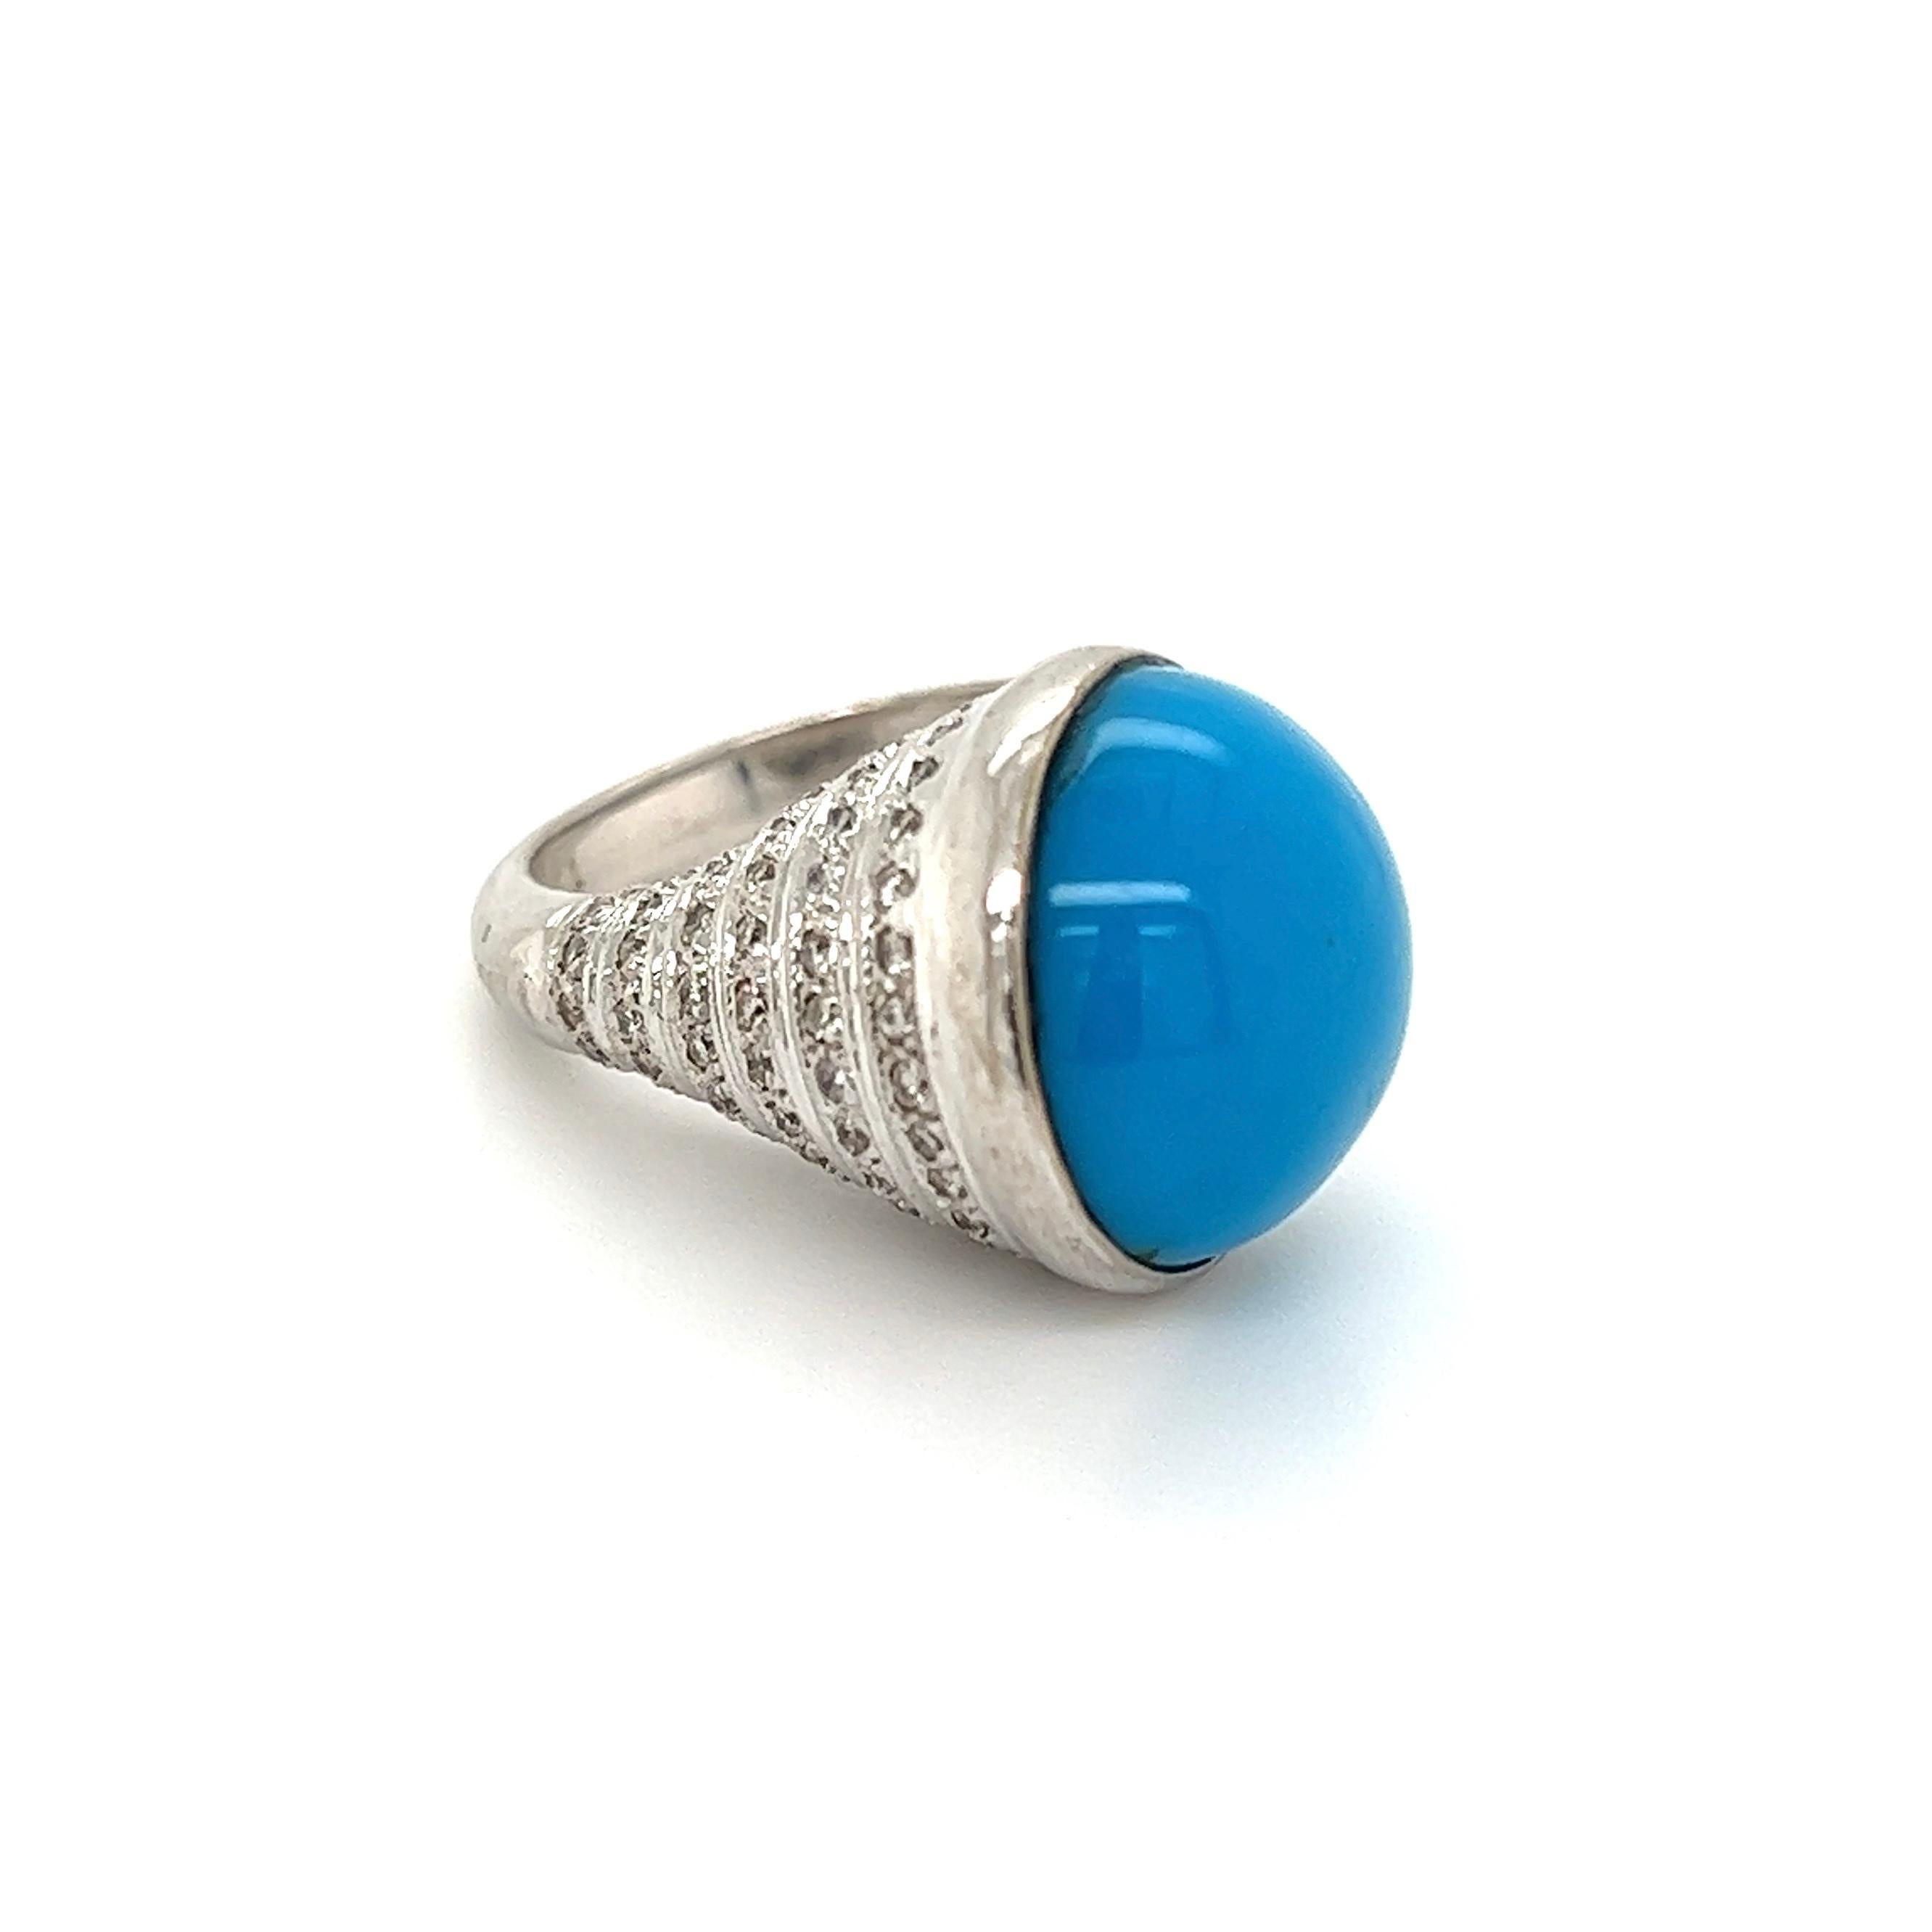 Simply Fabulous! Finely detailed Stylish Cabochon Turquoise and Diamond Gold Cocktail Ring. Centering a securely nestled Hand set Cabochon Turquoise, accented by Diamonds, approx. 80ctw set in an Inverse Cone shaped mounting. Dimensions 1.21” l x